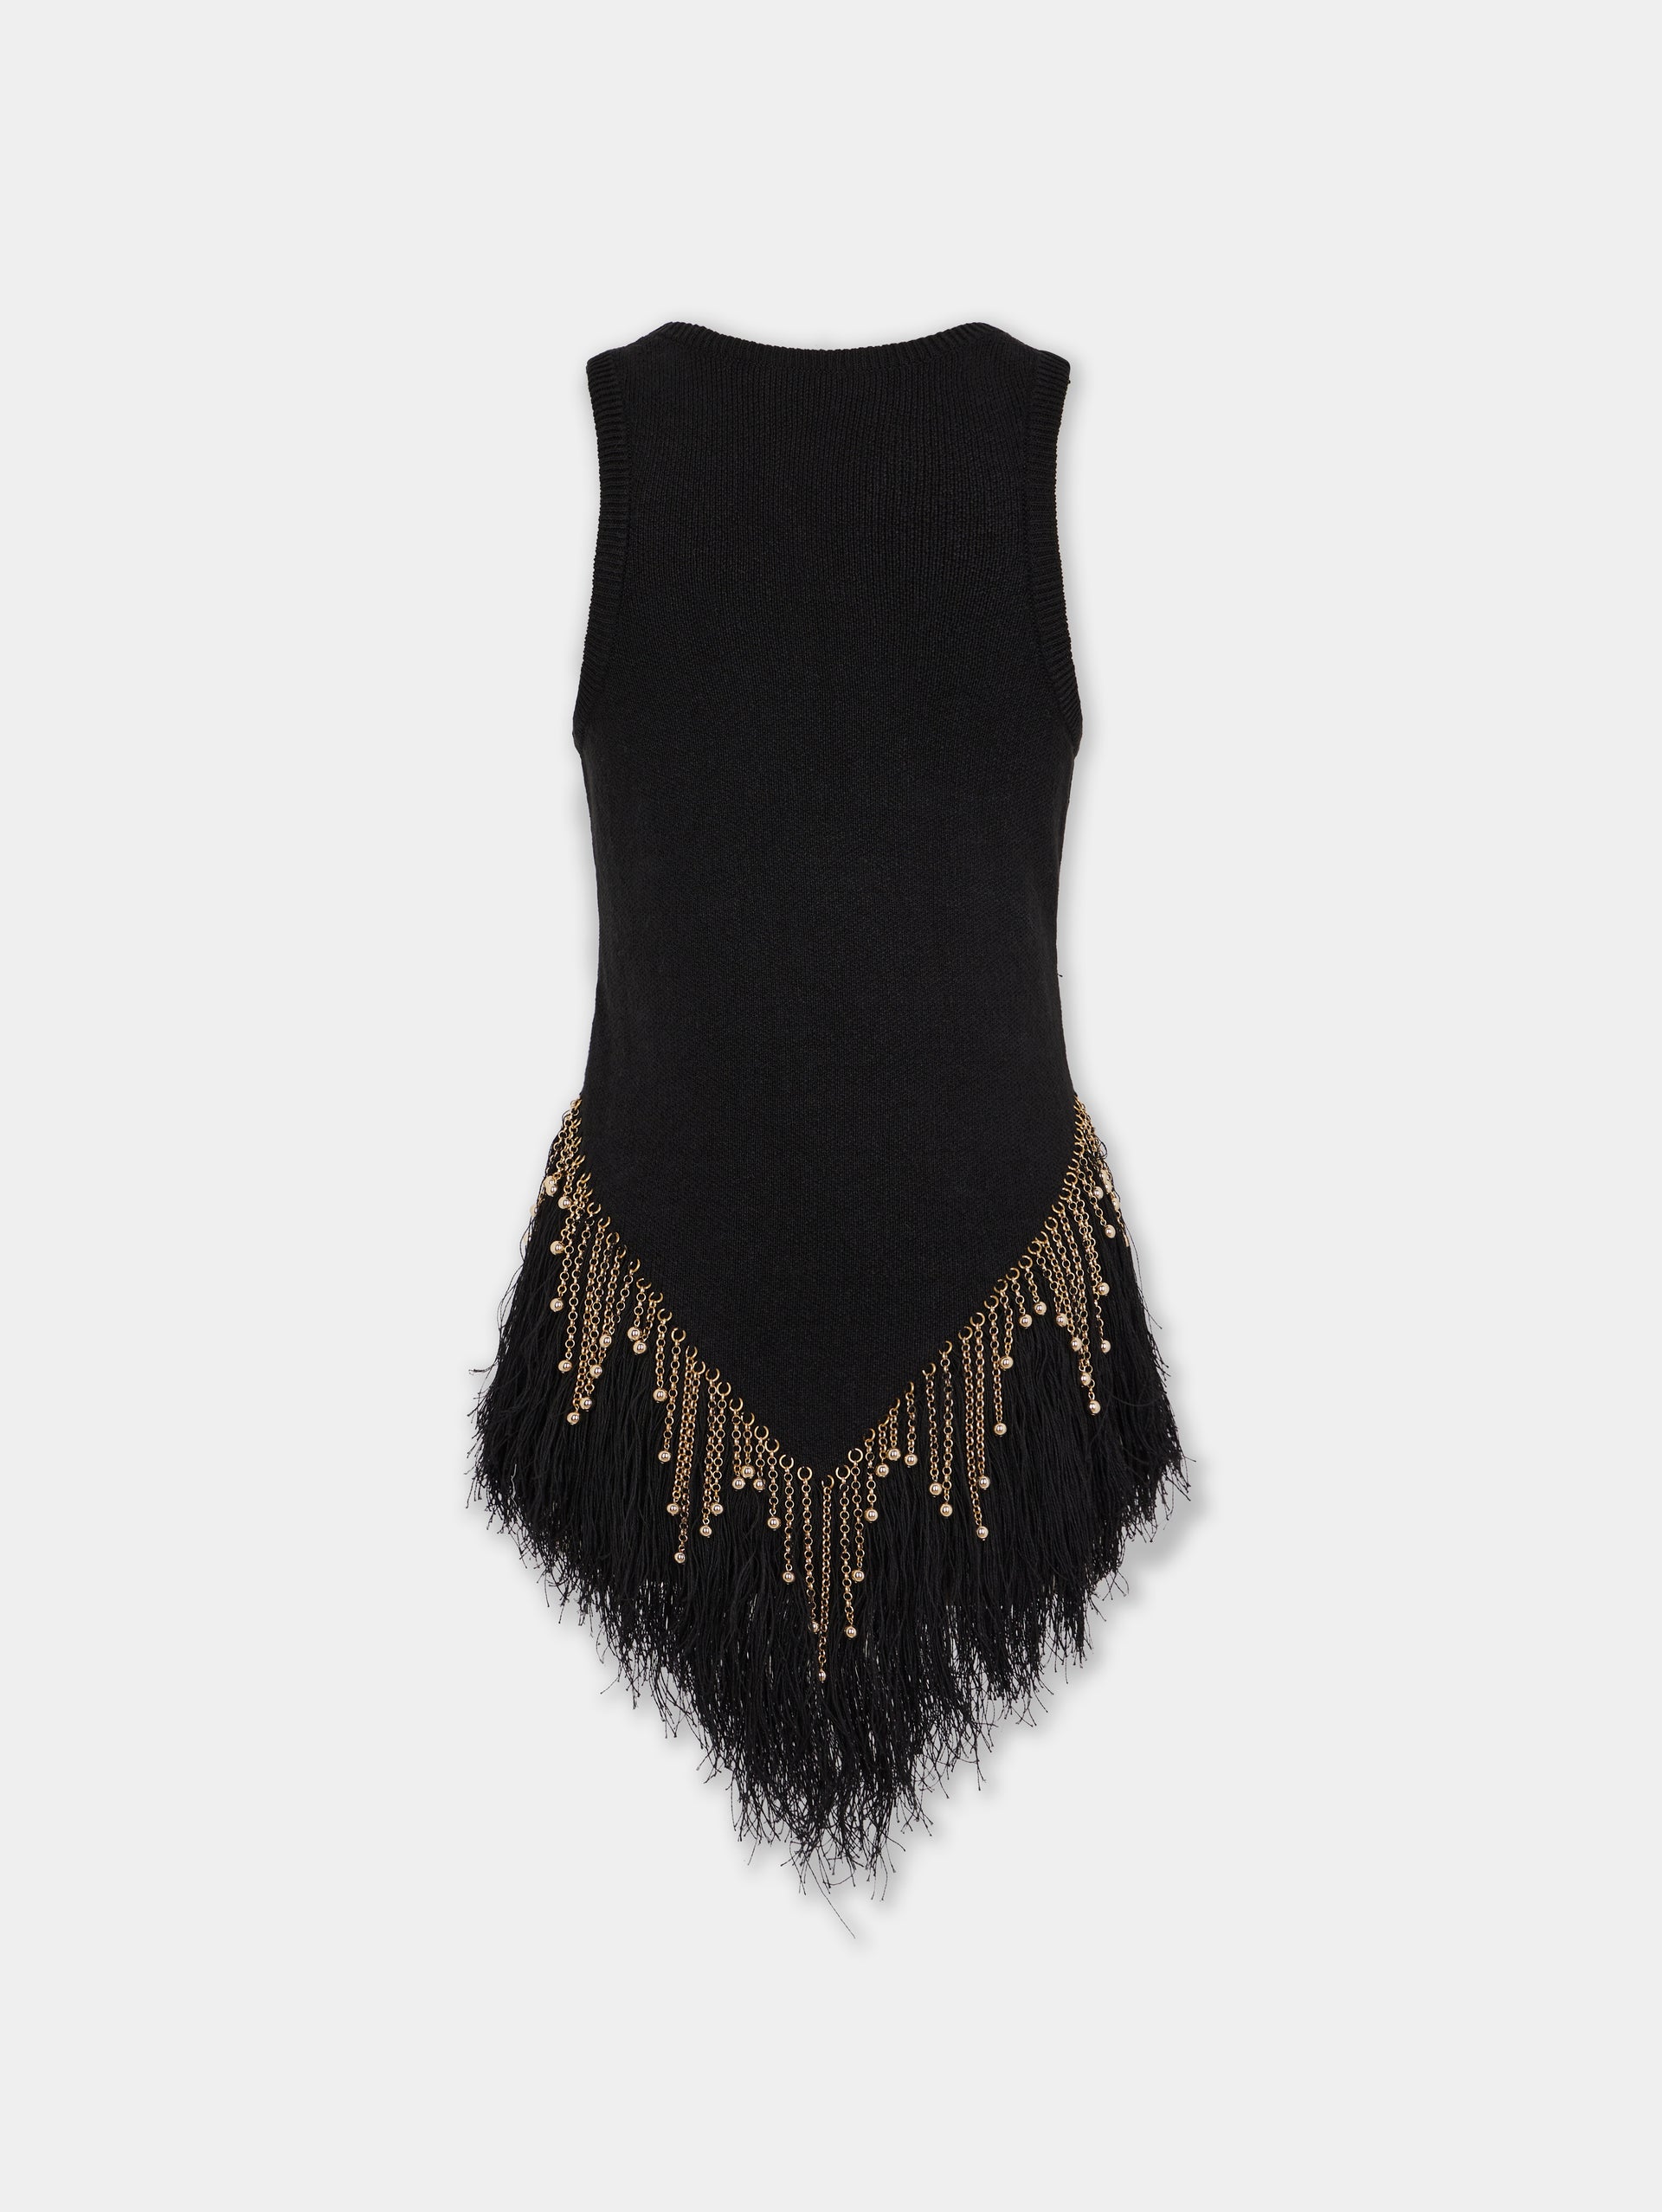 Black woven top with knitted beads and feathers